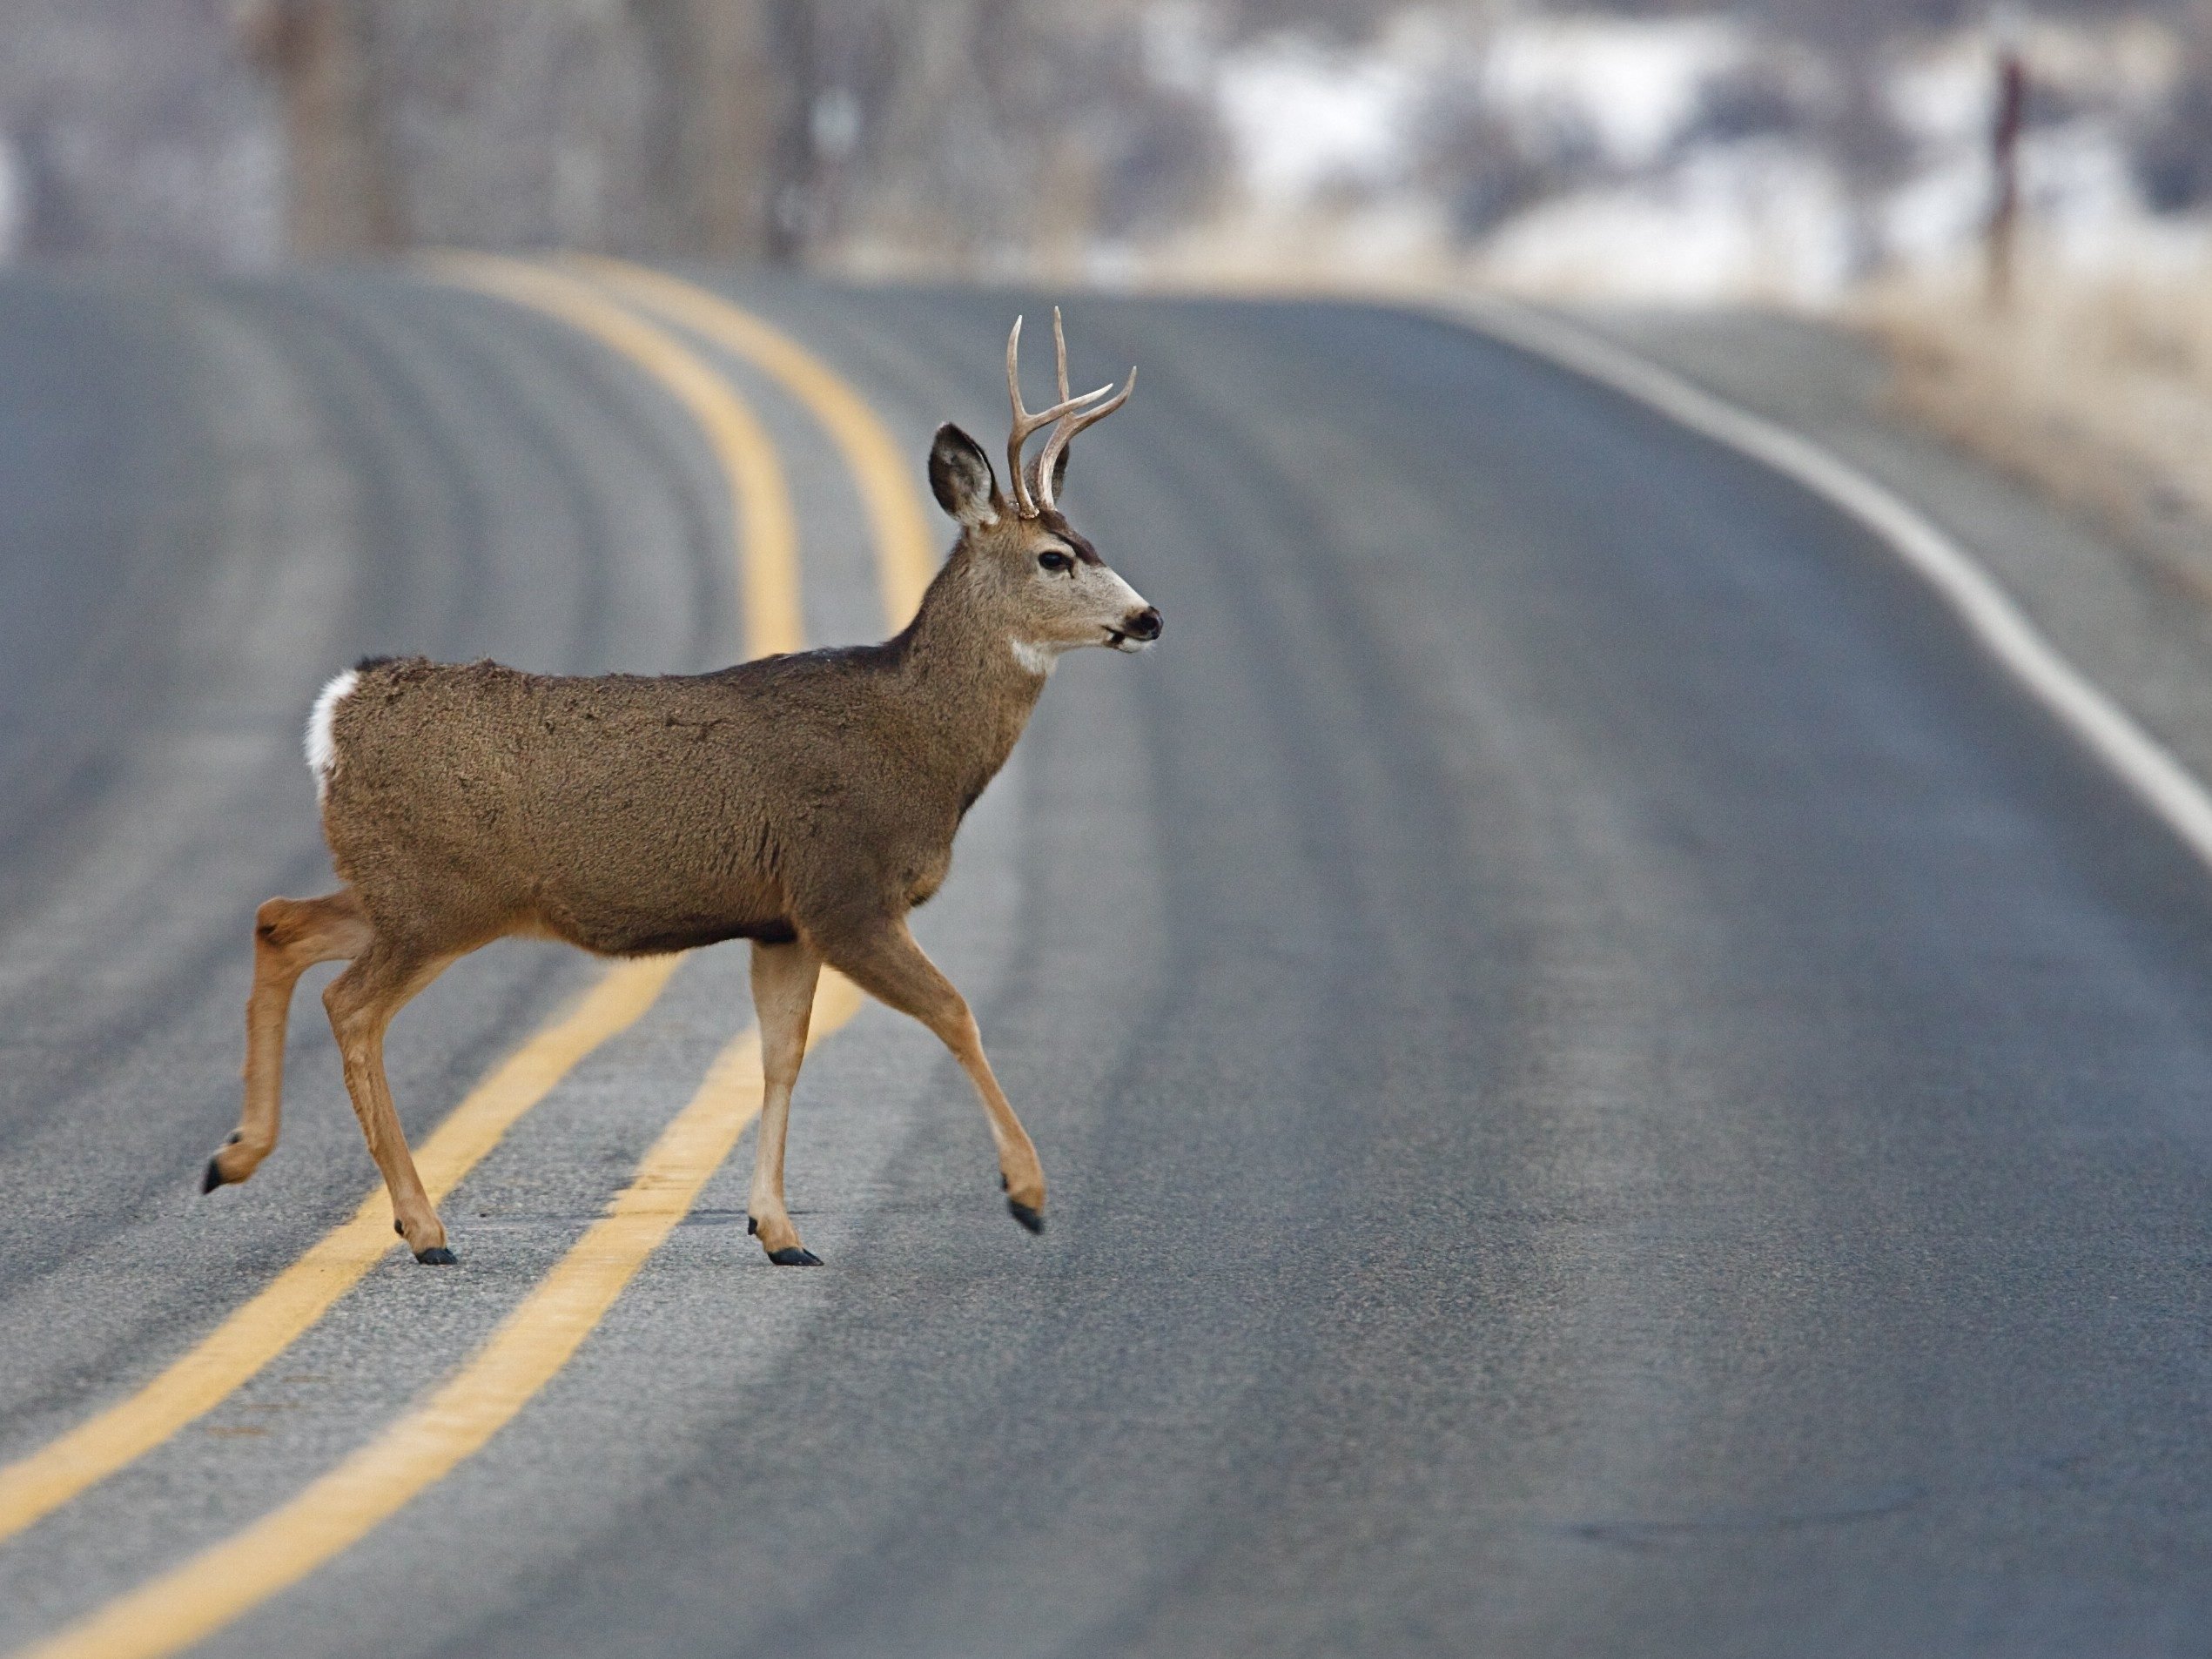 Driving tip #10: Watch for wildlife.